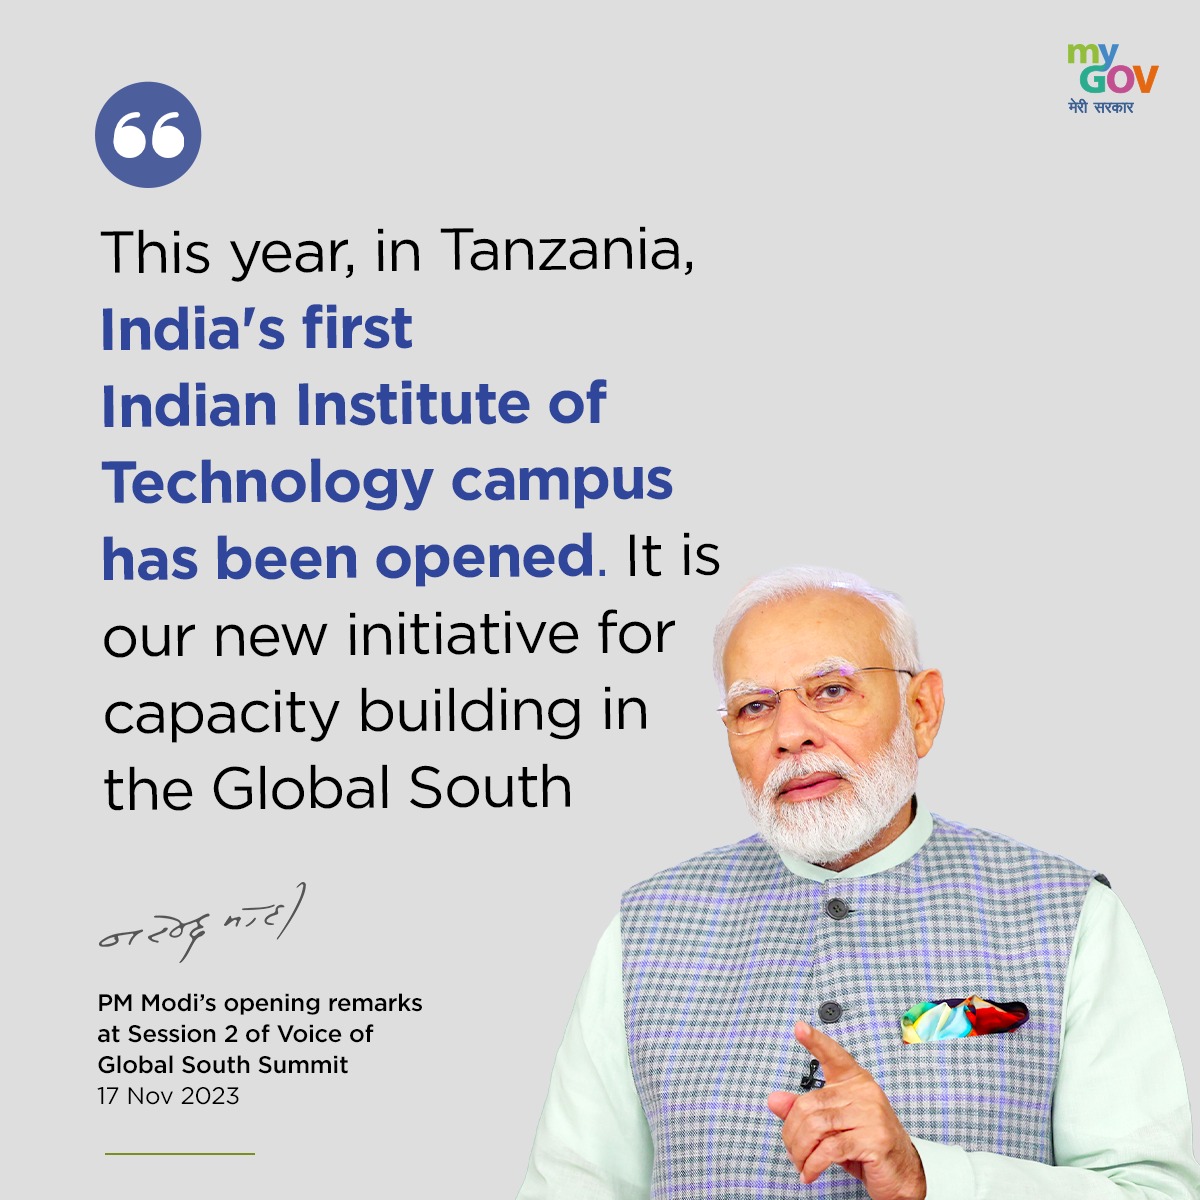 This year, in Tanzania, India's first Indian Institute of Technology campus has been opened

#VoiceOfGlobalSouth #GlobalSouthSummit